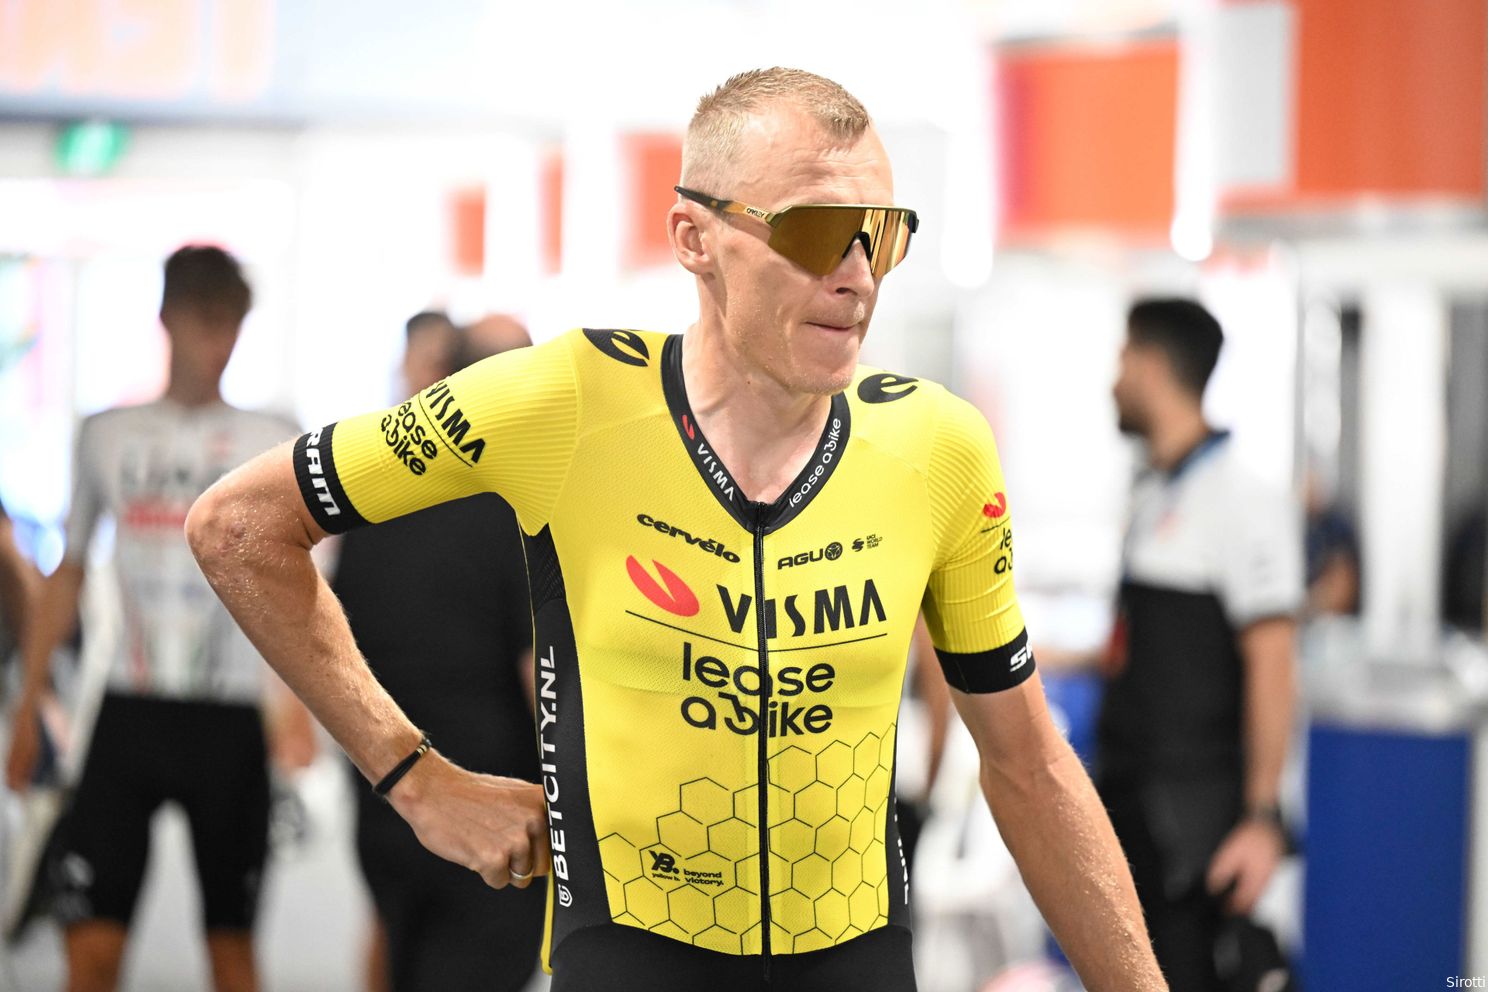 Robert Gesink on "last season in style", Giro crash and possible new role at Visma | Lease a Bike